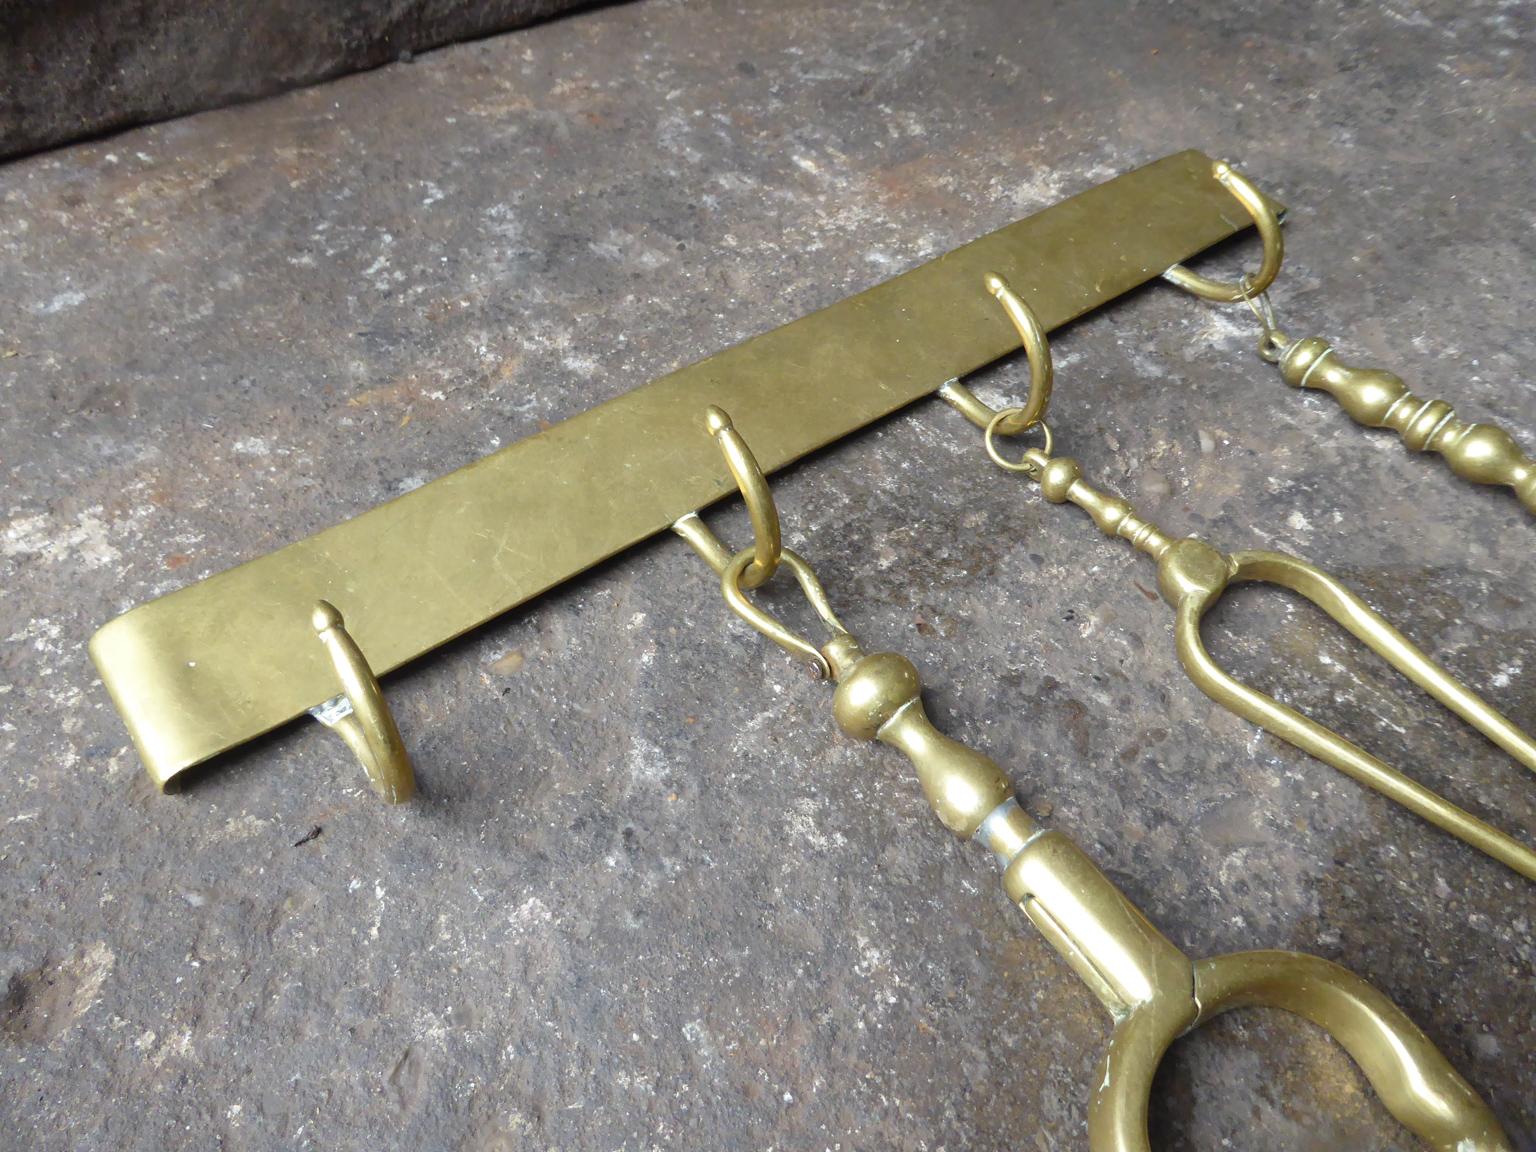 Set of 18th century Dutch fireplace tools with a hanger. The tools and hanger are made of polished brass. They are in a good condition and fully functional.







